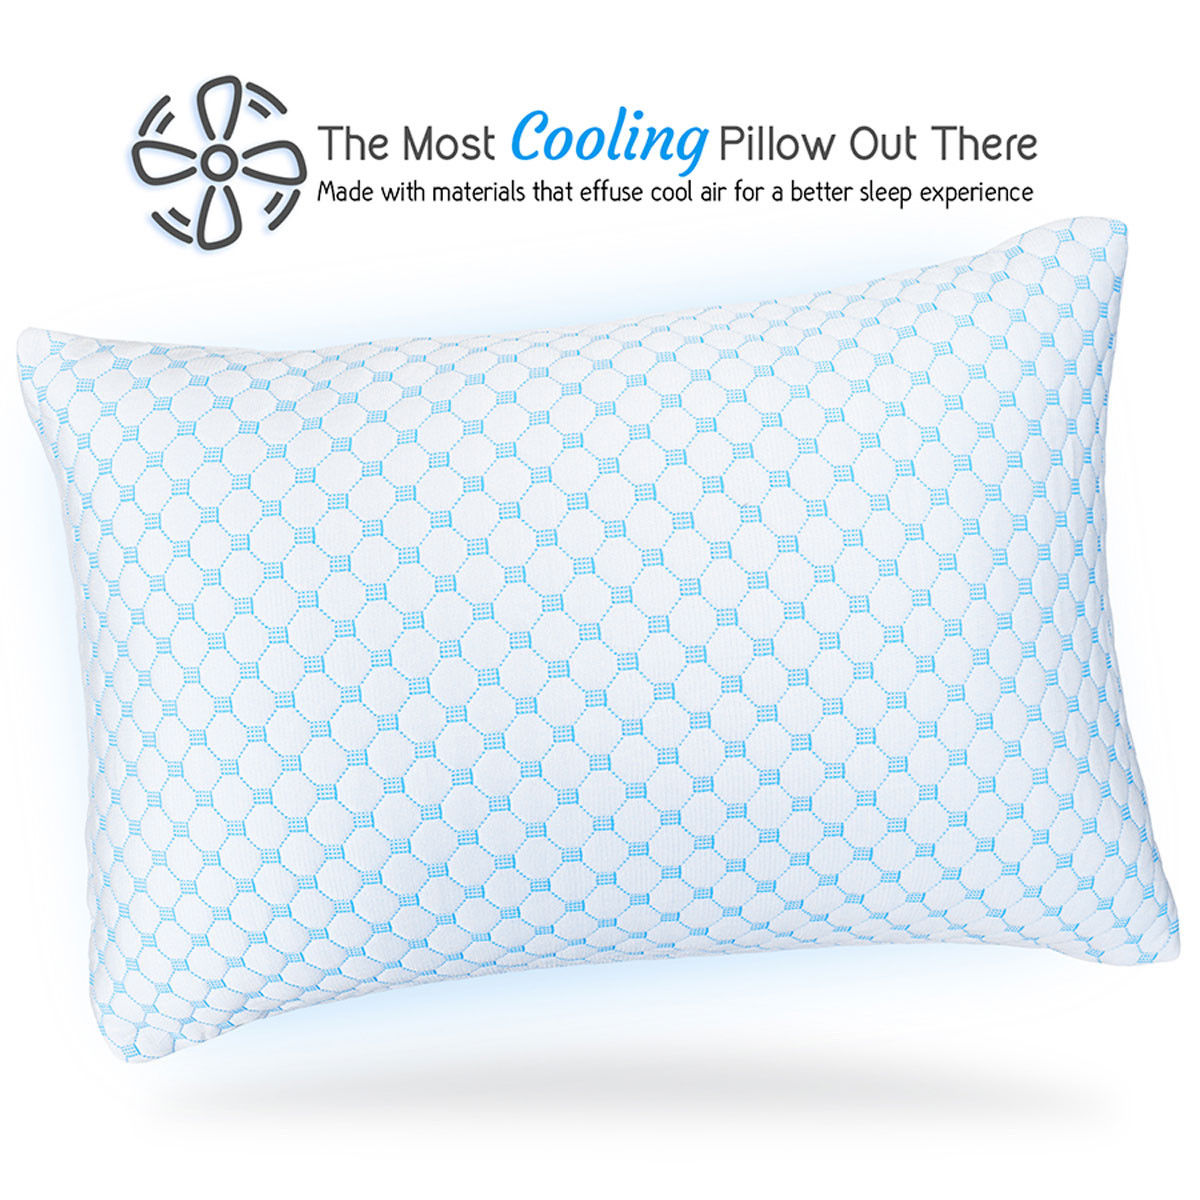 What is the mechanism behind the cooling effect of the Clara Clark Reversible Cooling Pillow?